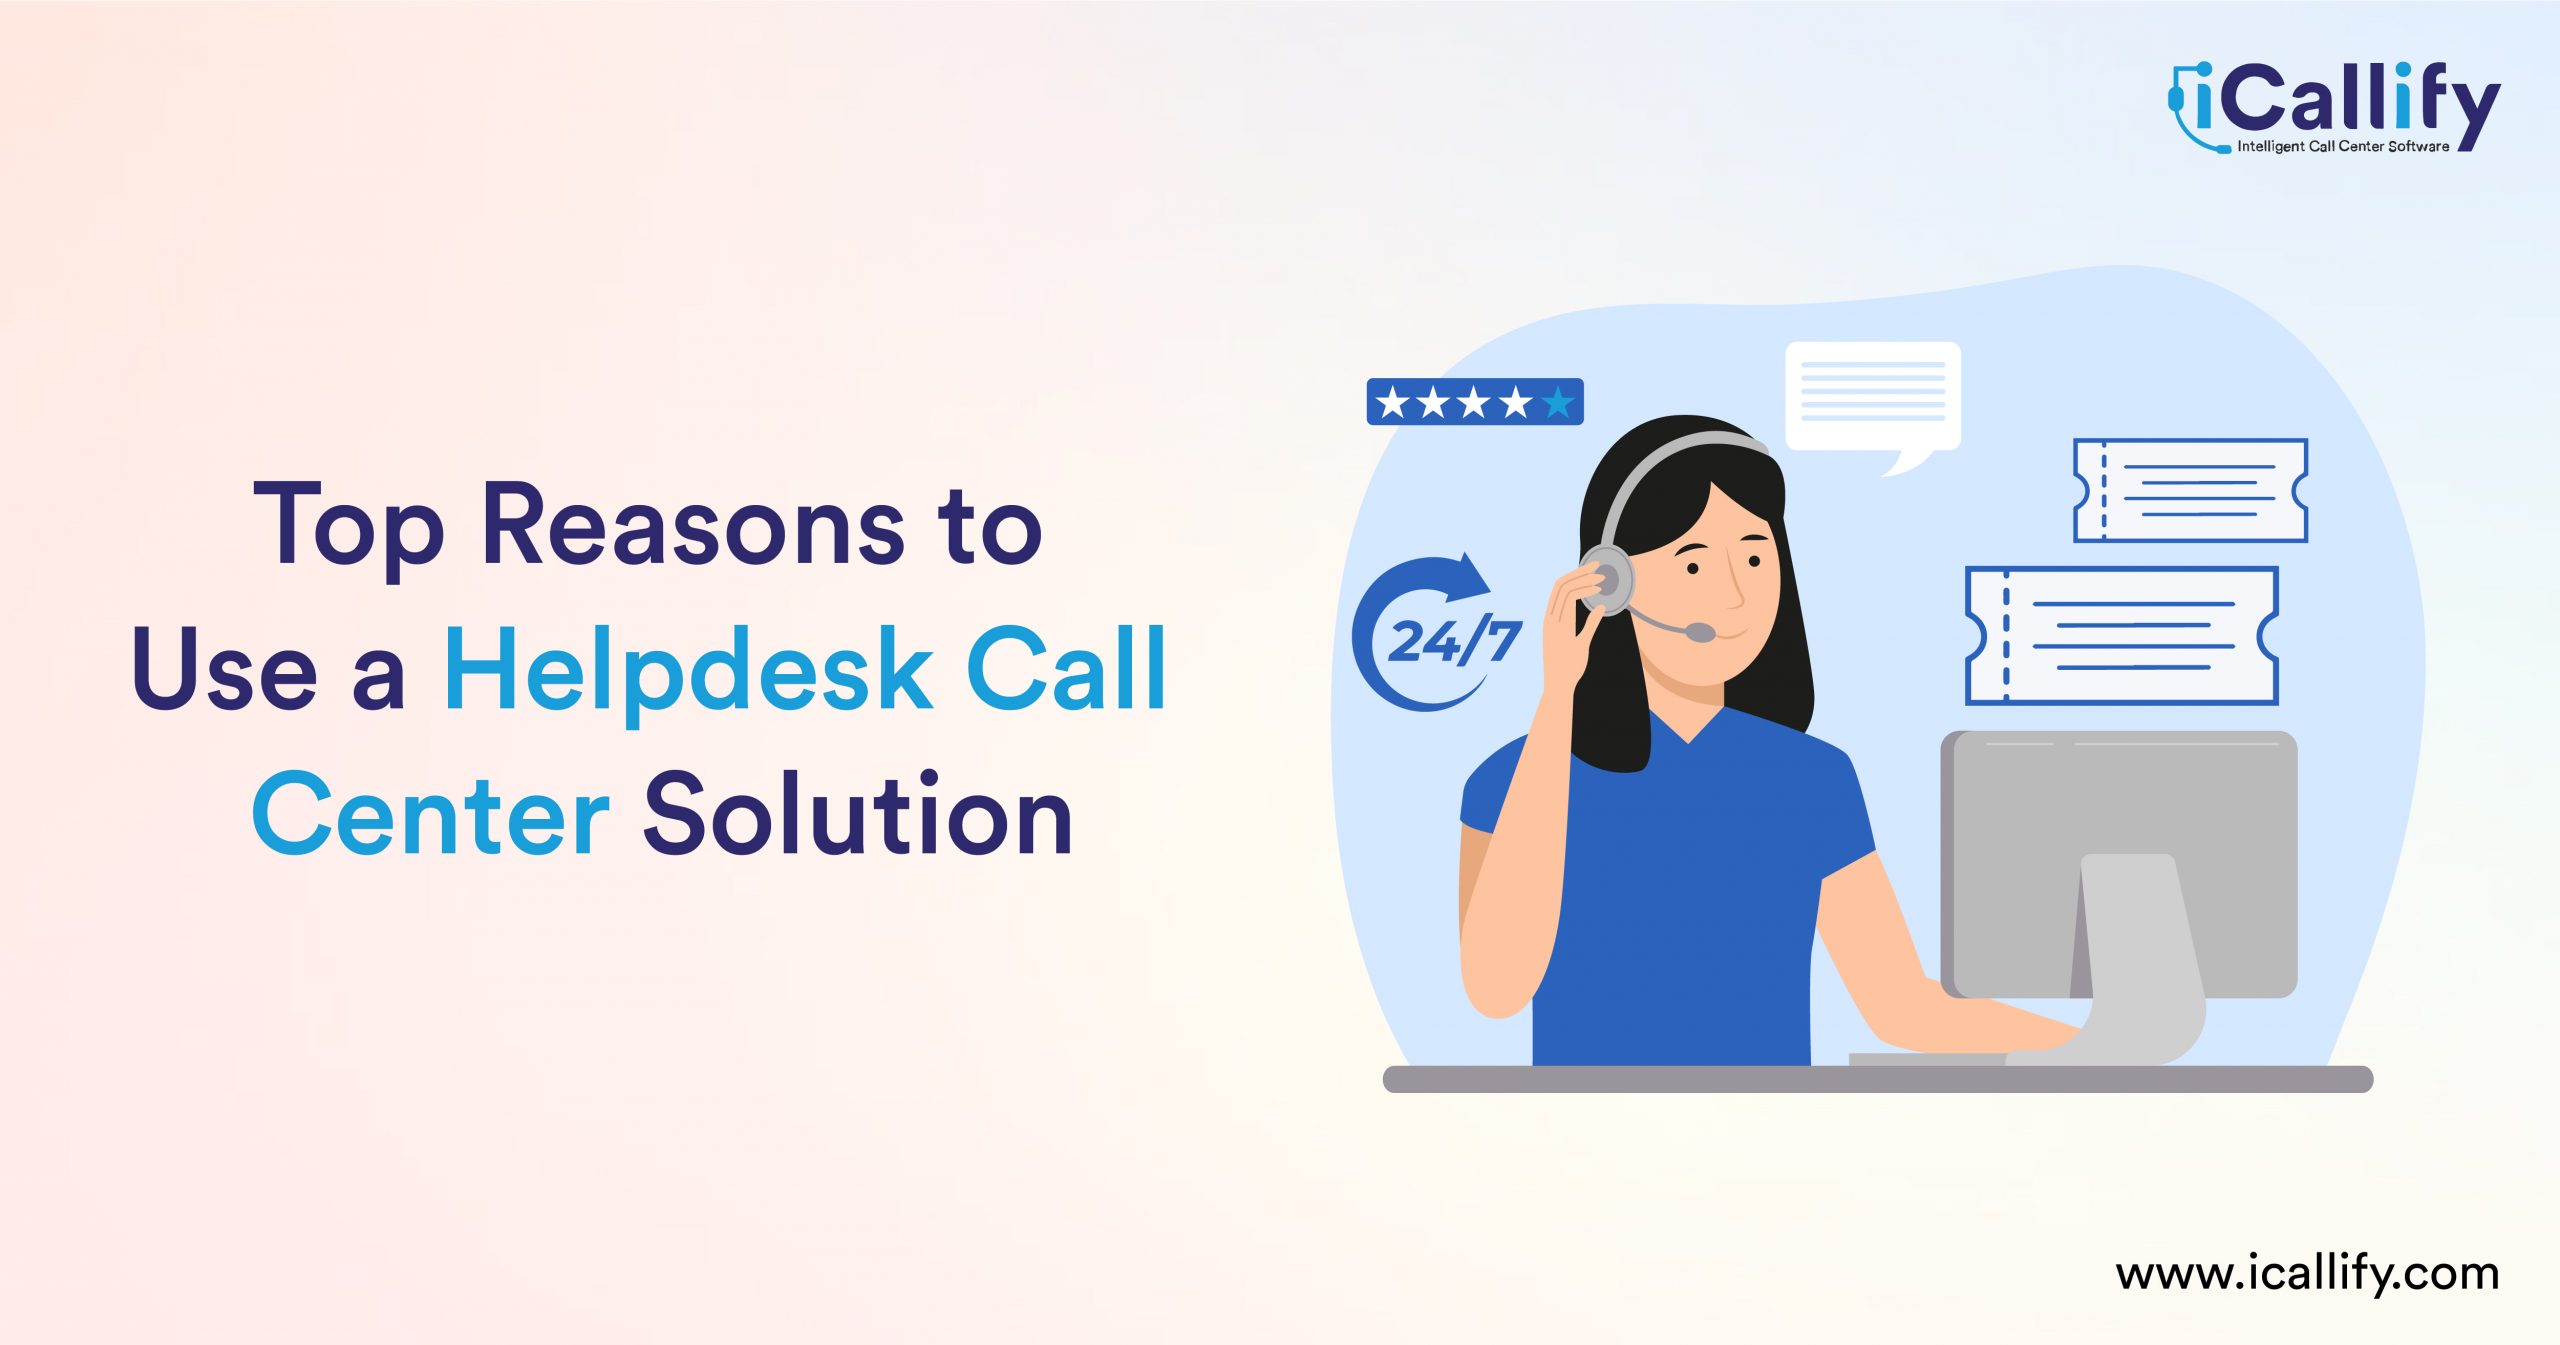 Top Reasons to Use a Helpdesk Call Center Solution